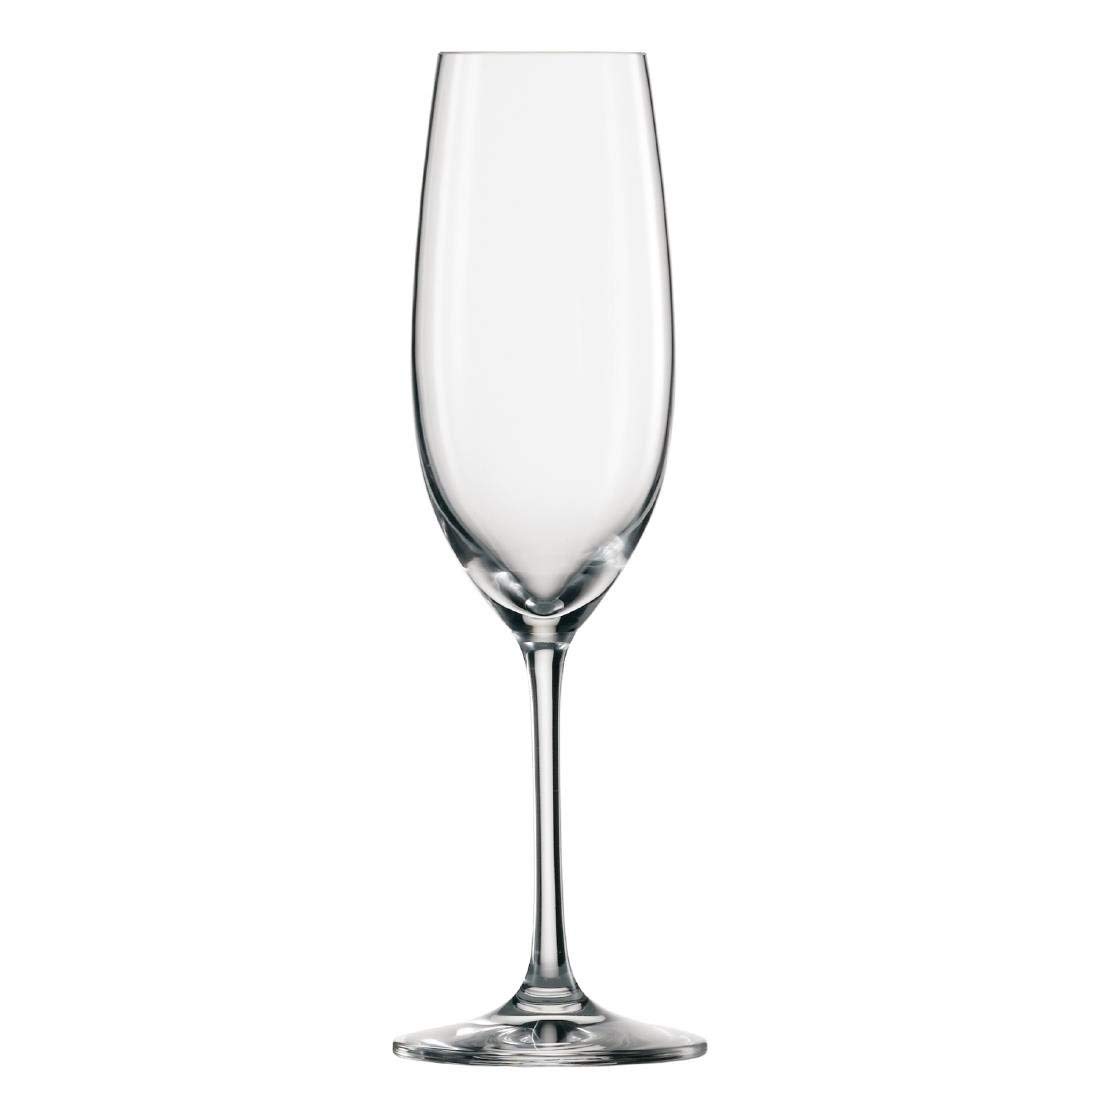 Schott Zwiesel IVento champagne glasses, 230 ml, 6 pieces